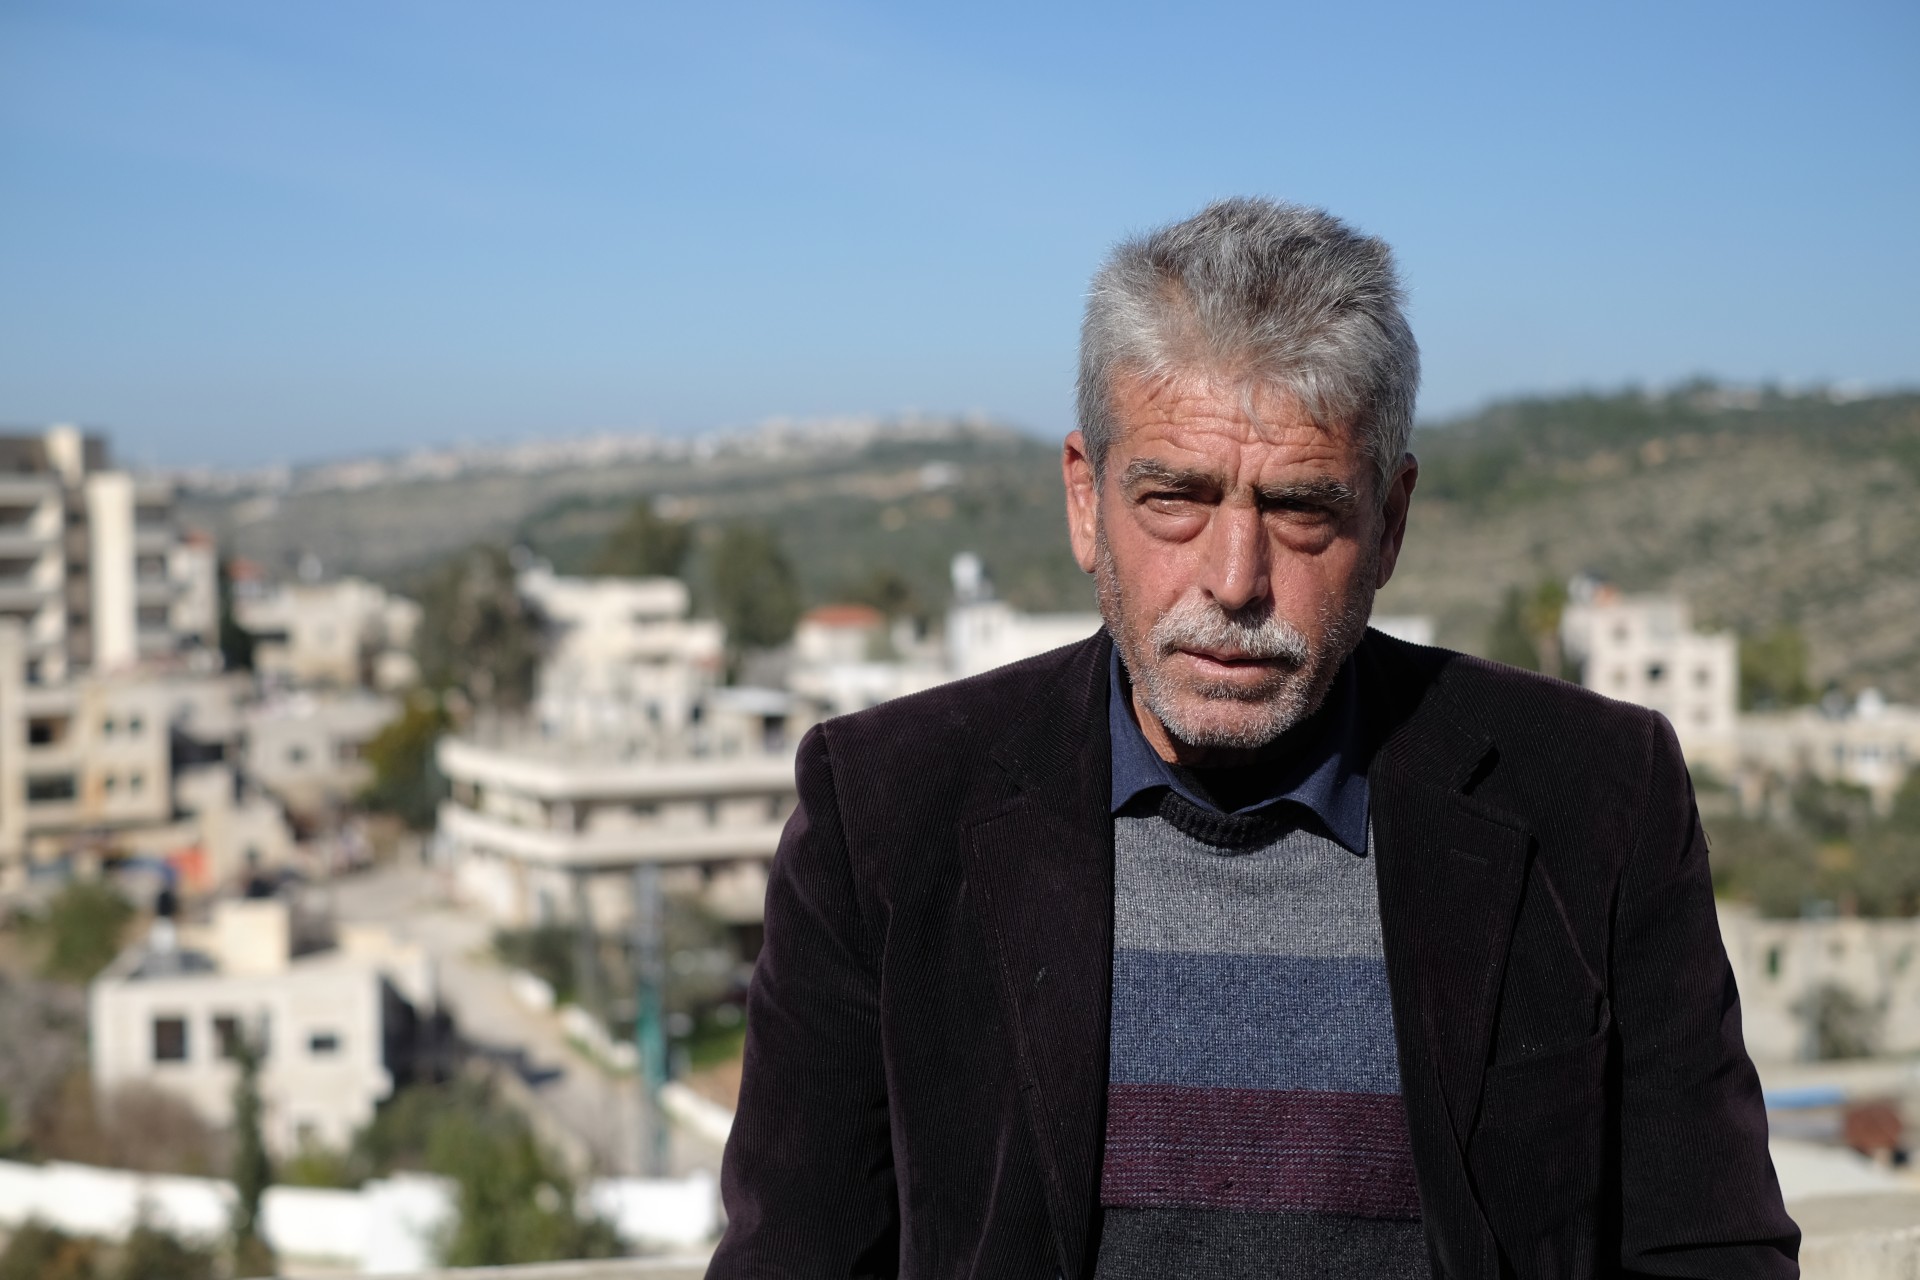 The father of Khaled Nofal, who was killed in an altercation with Israeli settlers, on top of the family home in the West Bank village of Ras Karkar on February 11, 2021. (Judah Ari Gross/Times of Israel)